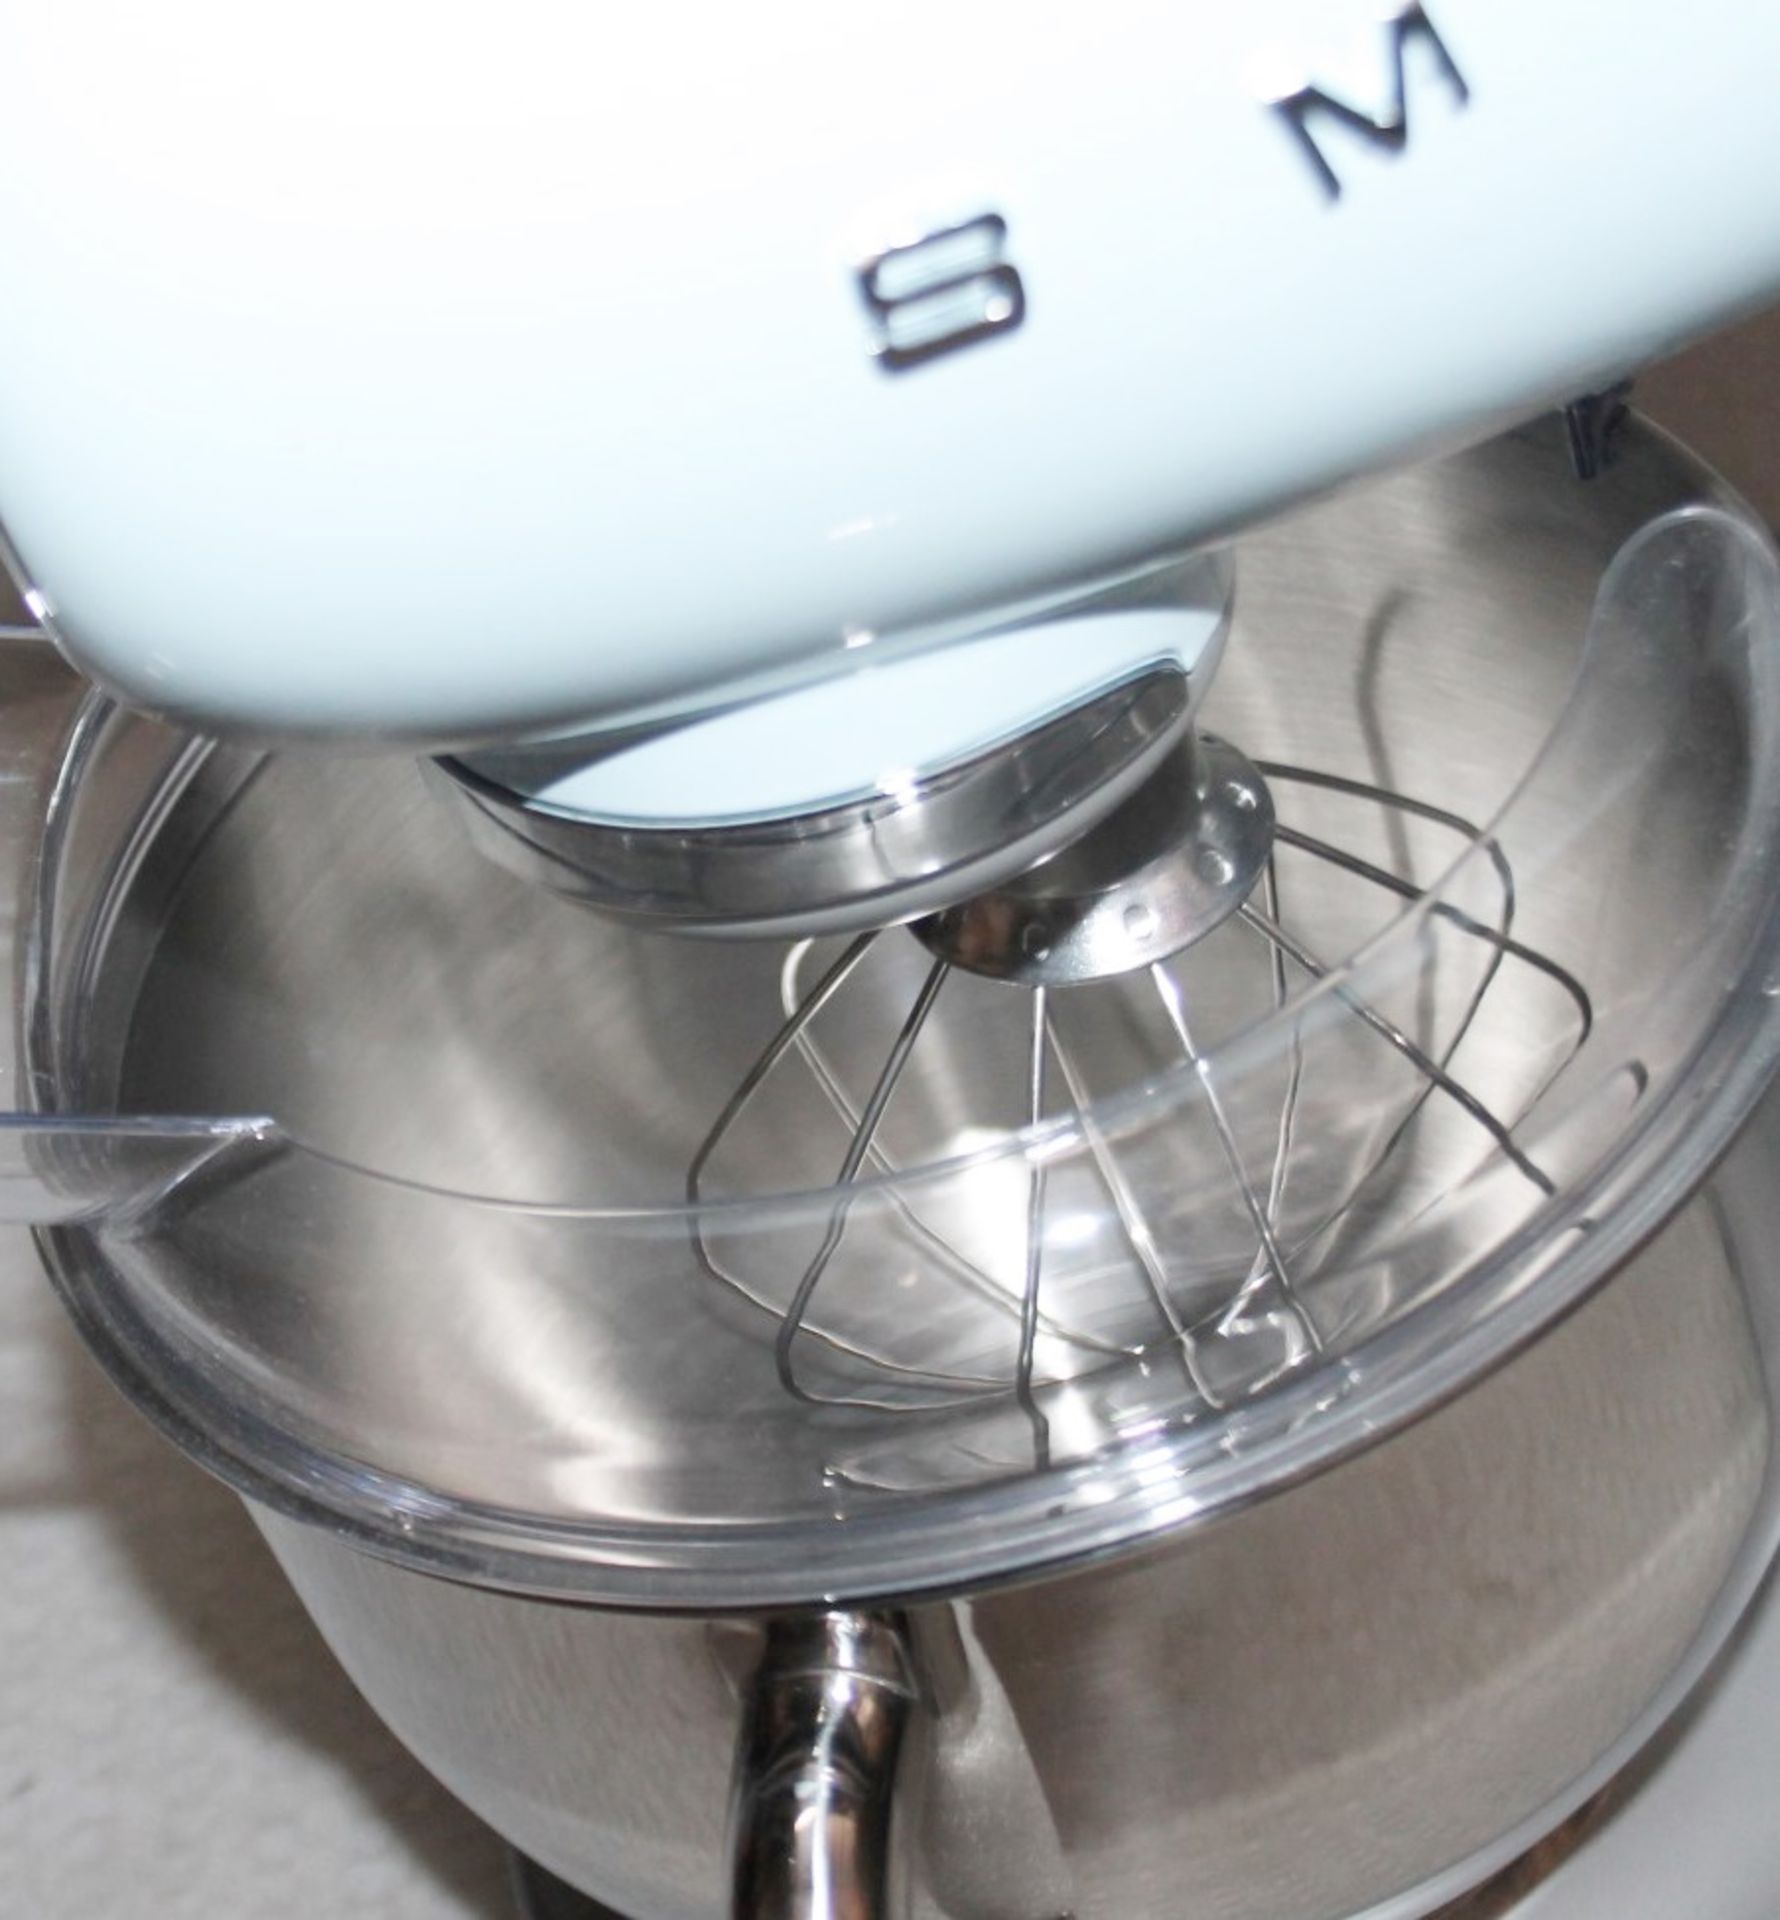 1 x SMEG 50'S Style Stand Mixer In Pale Blue (4.8L) Original Price £449.00 - Ex-Display - CL987 - - Image 7 of 14